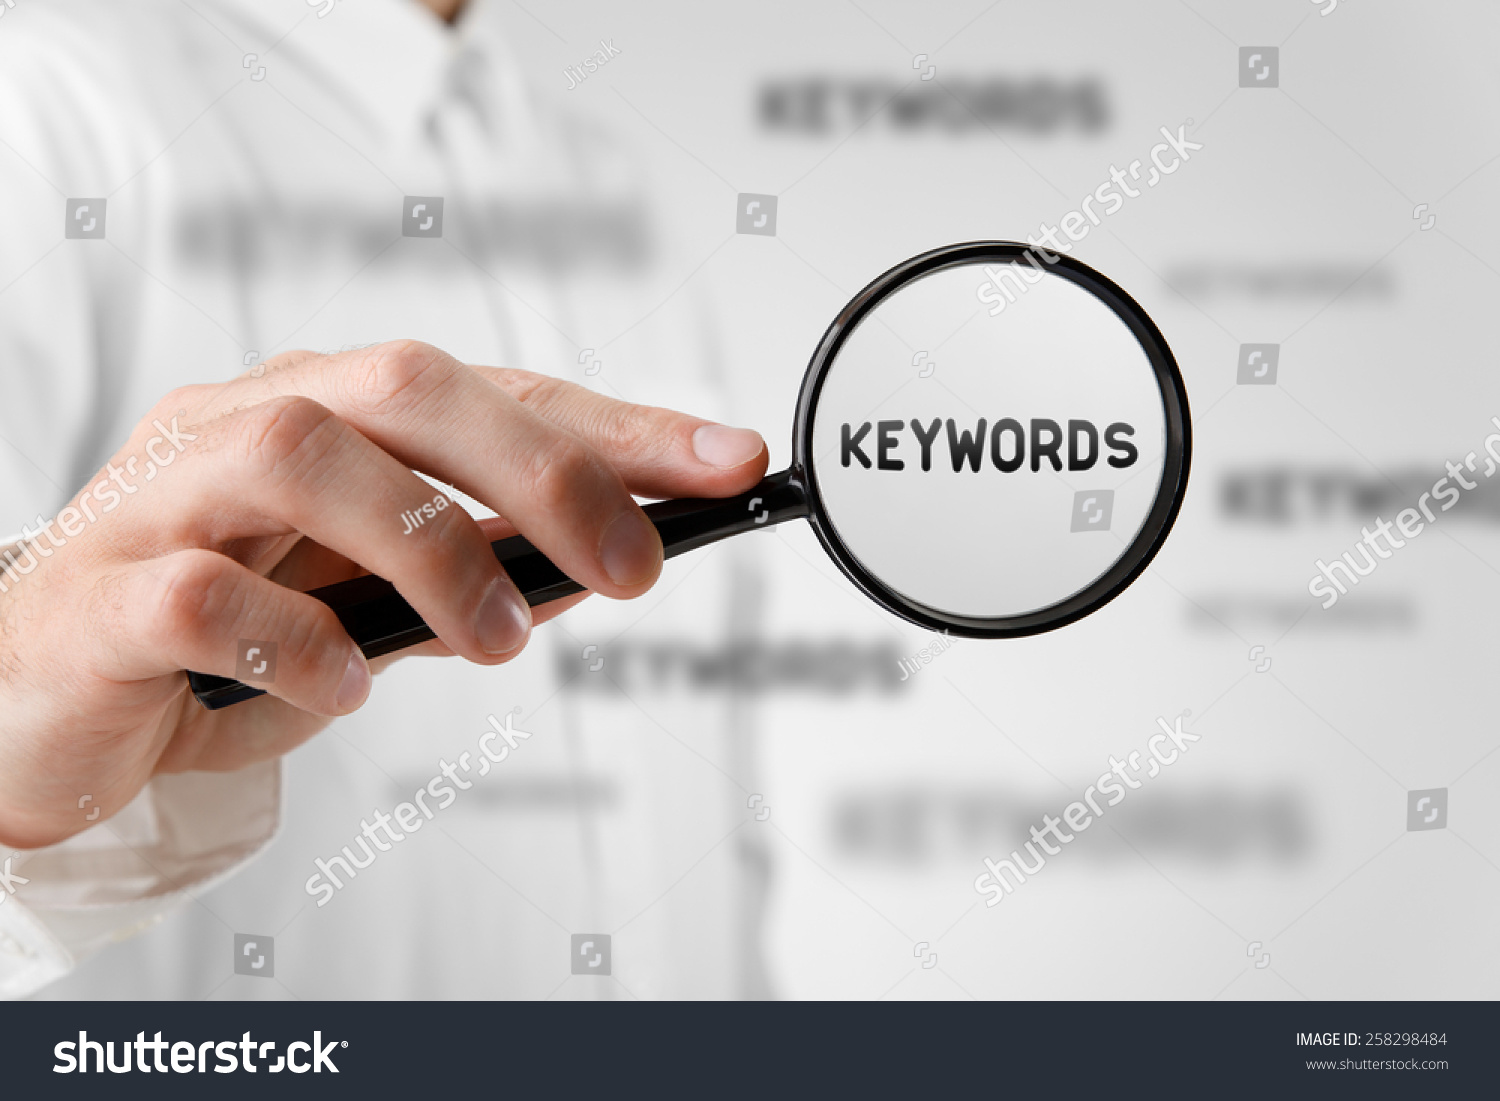 Find keywords concept. Marketing specialist looking for keywords (concept with magnifying glass).  #258298484